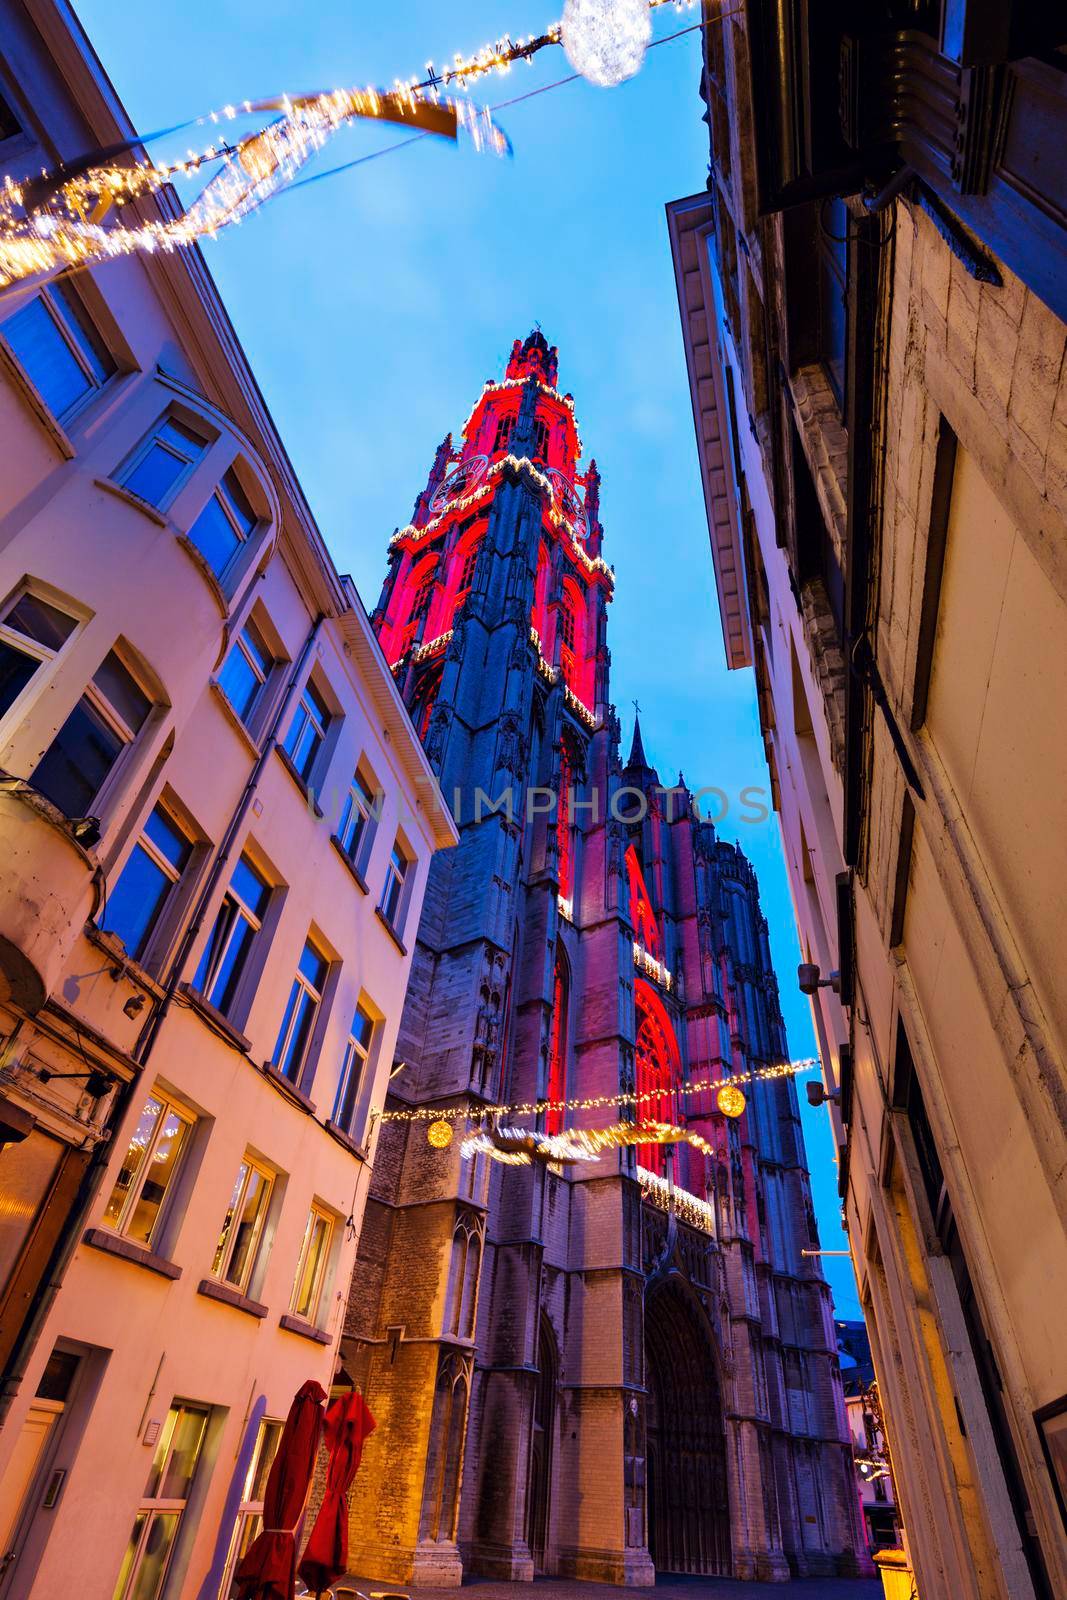 Cathedral of Our Lady in Antwerp by benkrut